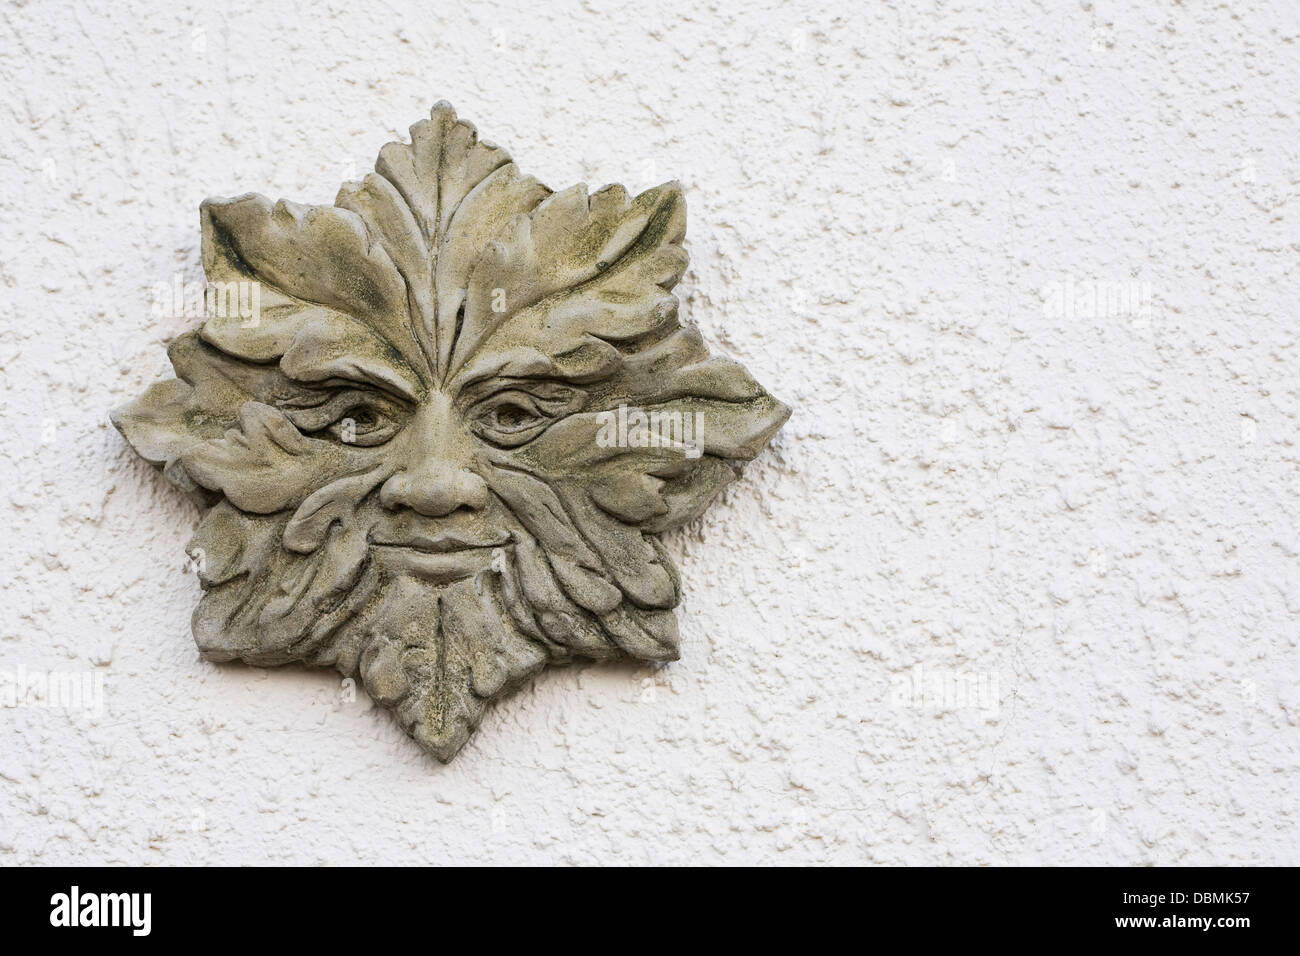 Green Man plaque on a white textured wall. Stock Photo